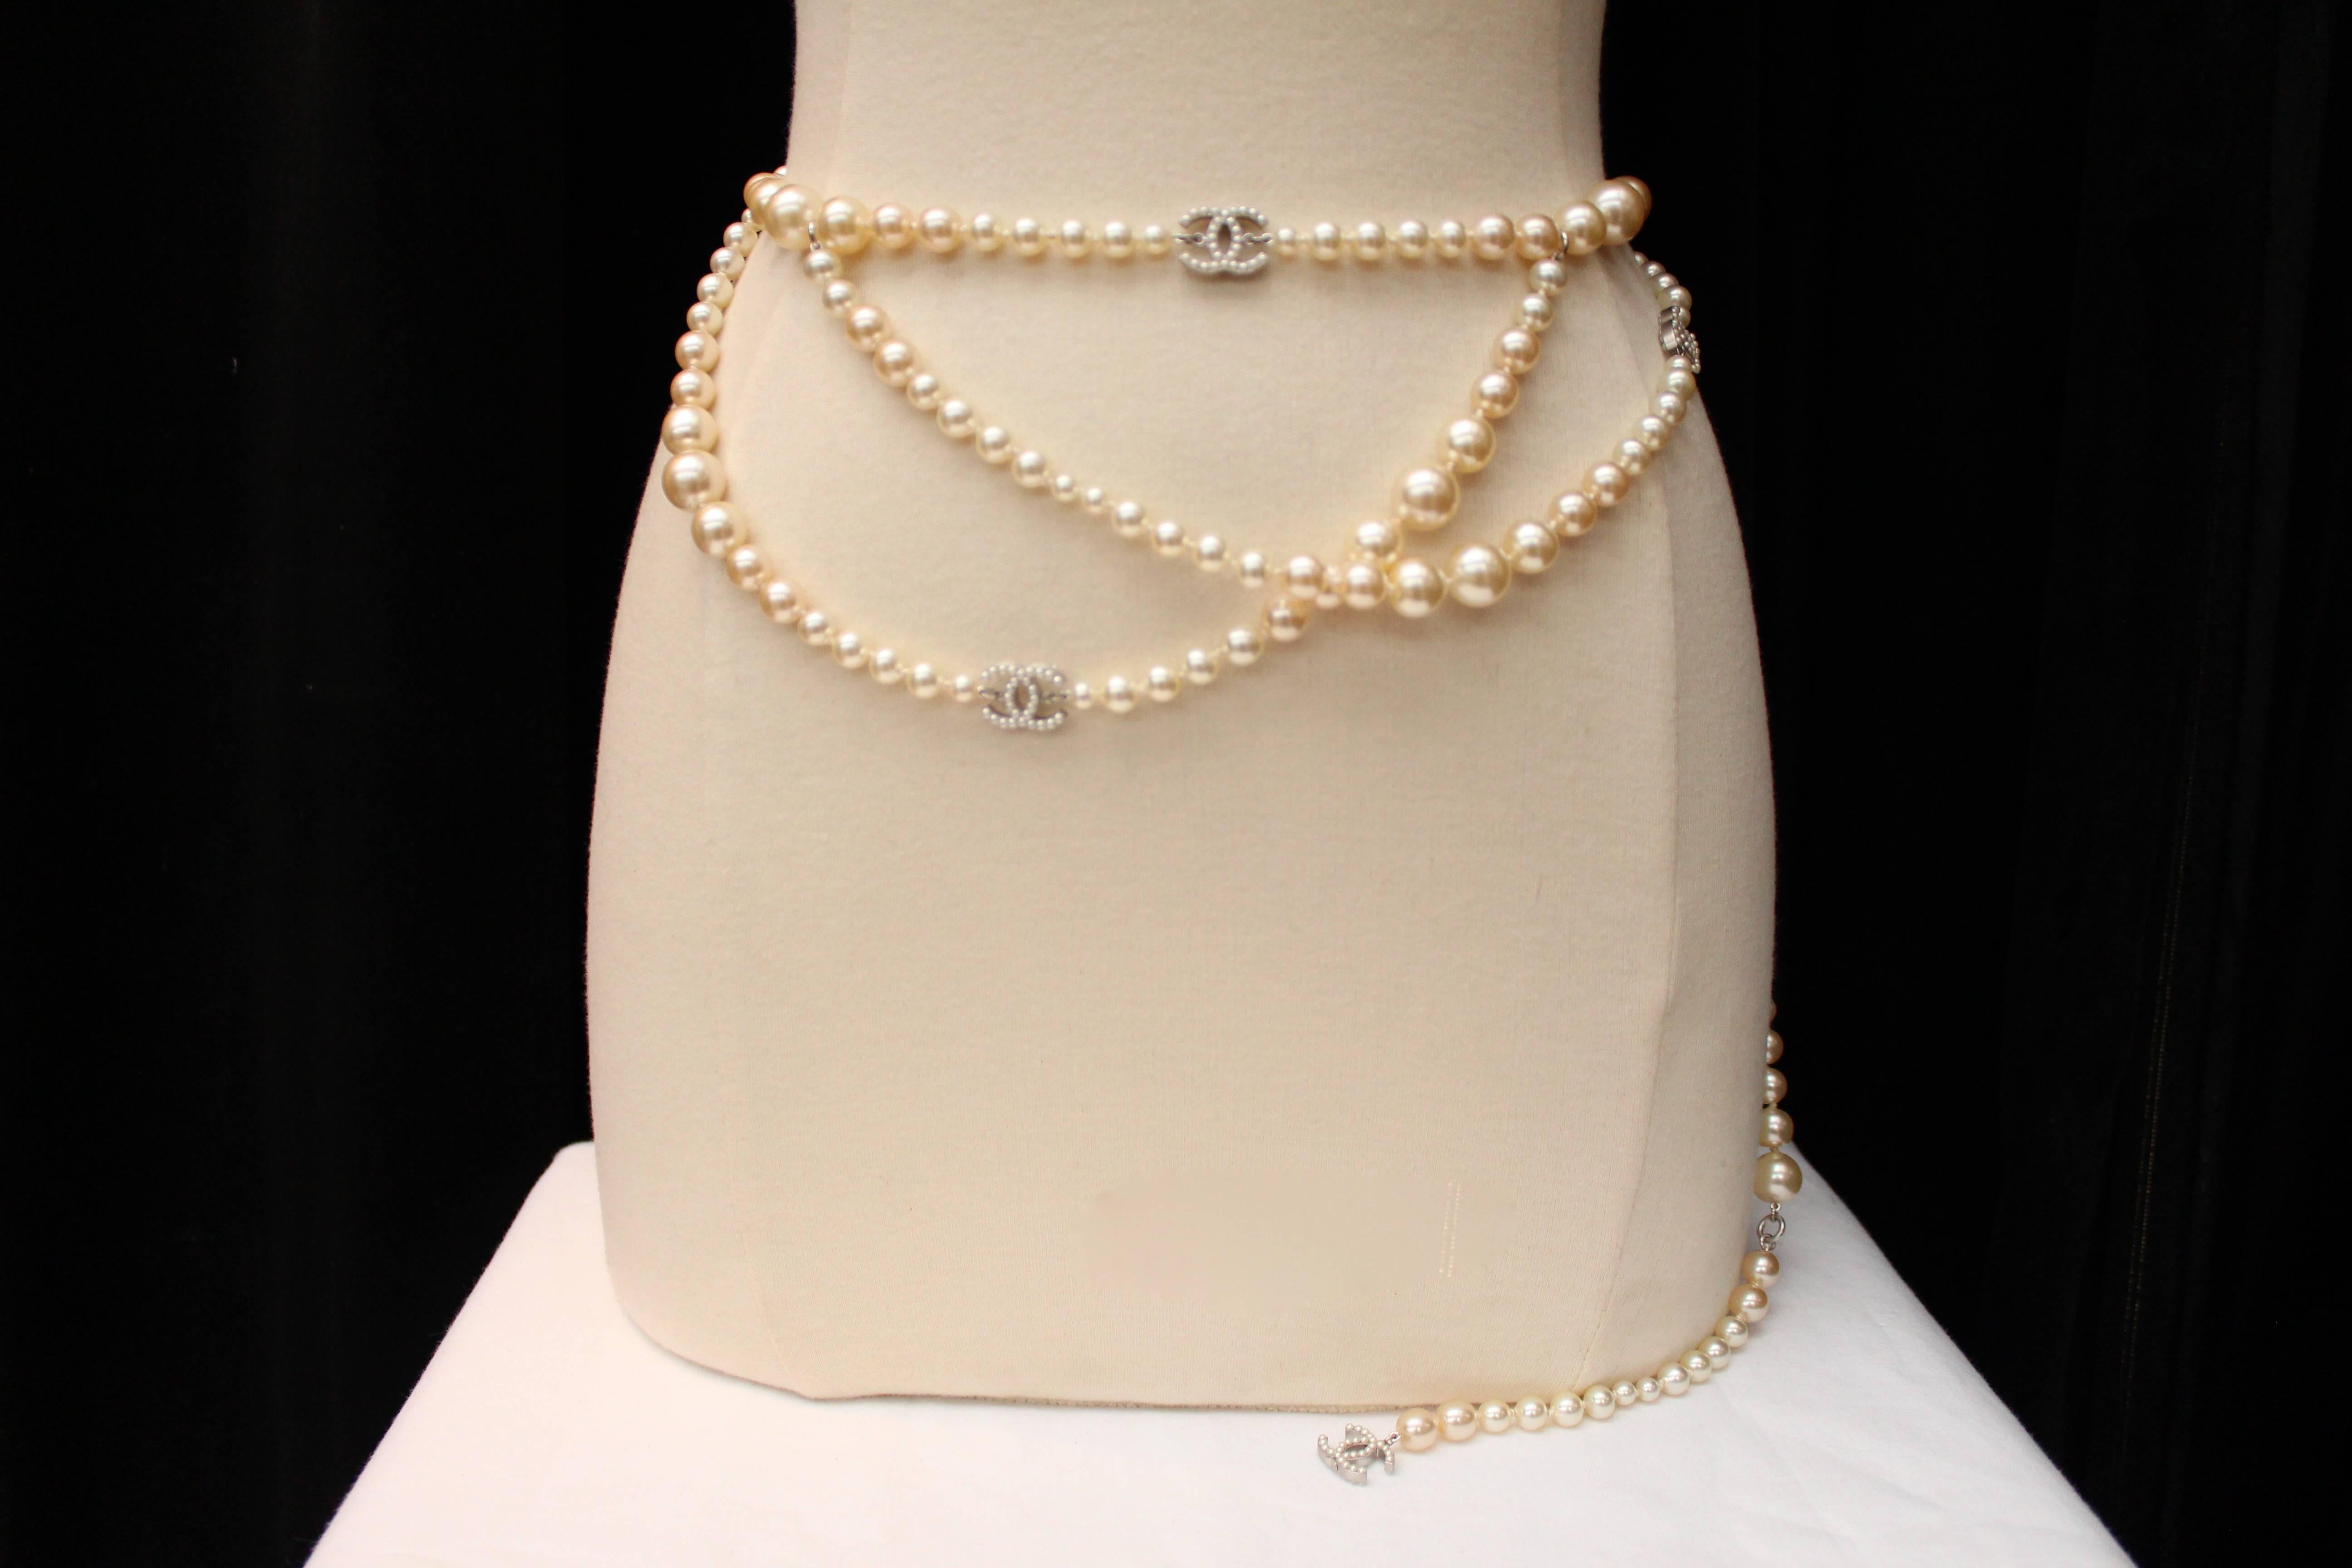 Beige 2004 Chanel Belt/Necklace in Faux Pearls and CC Logo